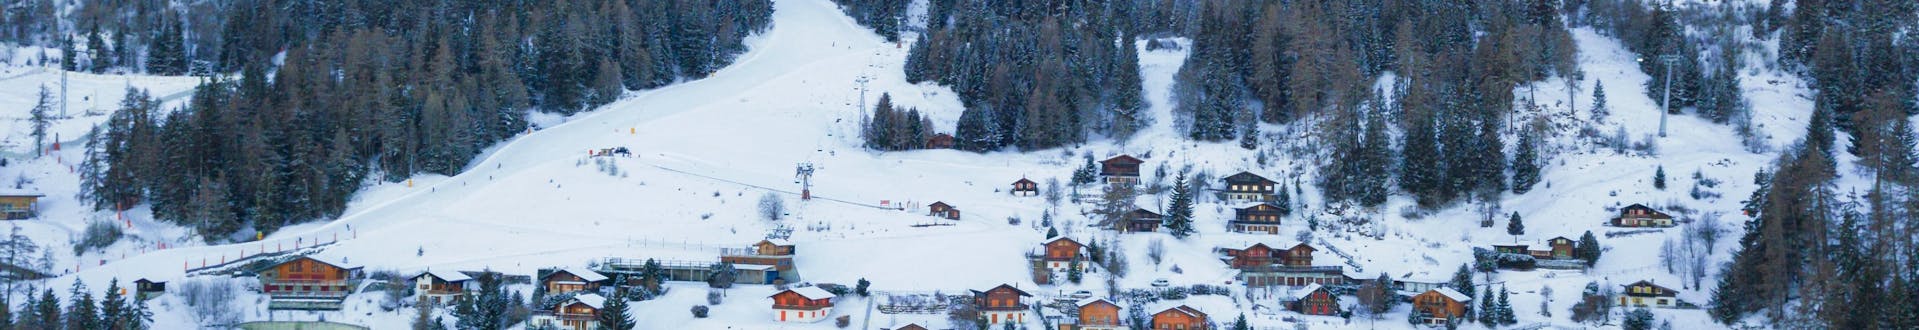 An aereal view of the small village of La Tzoumaz, a popular Swiss ski resort in which visitors can book ski lessons with the local ski schools.